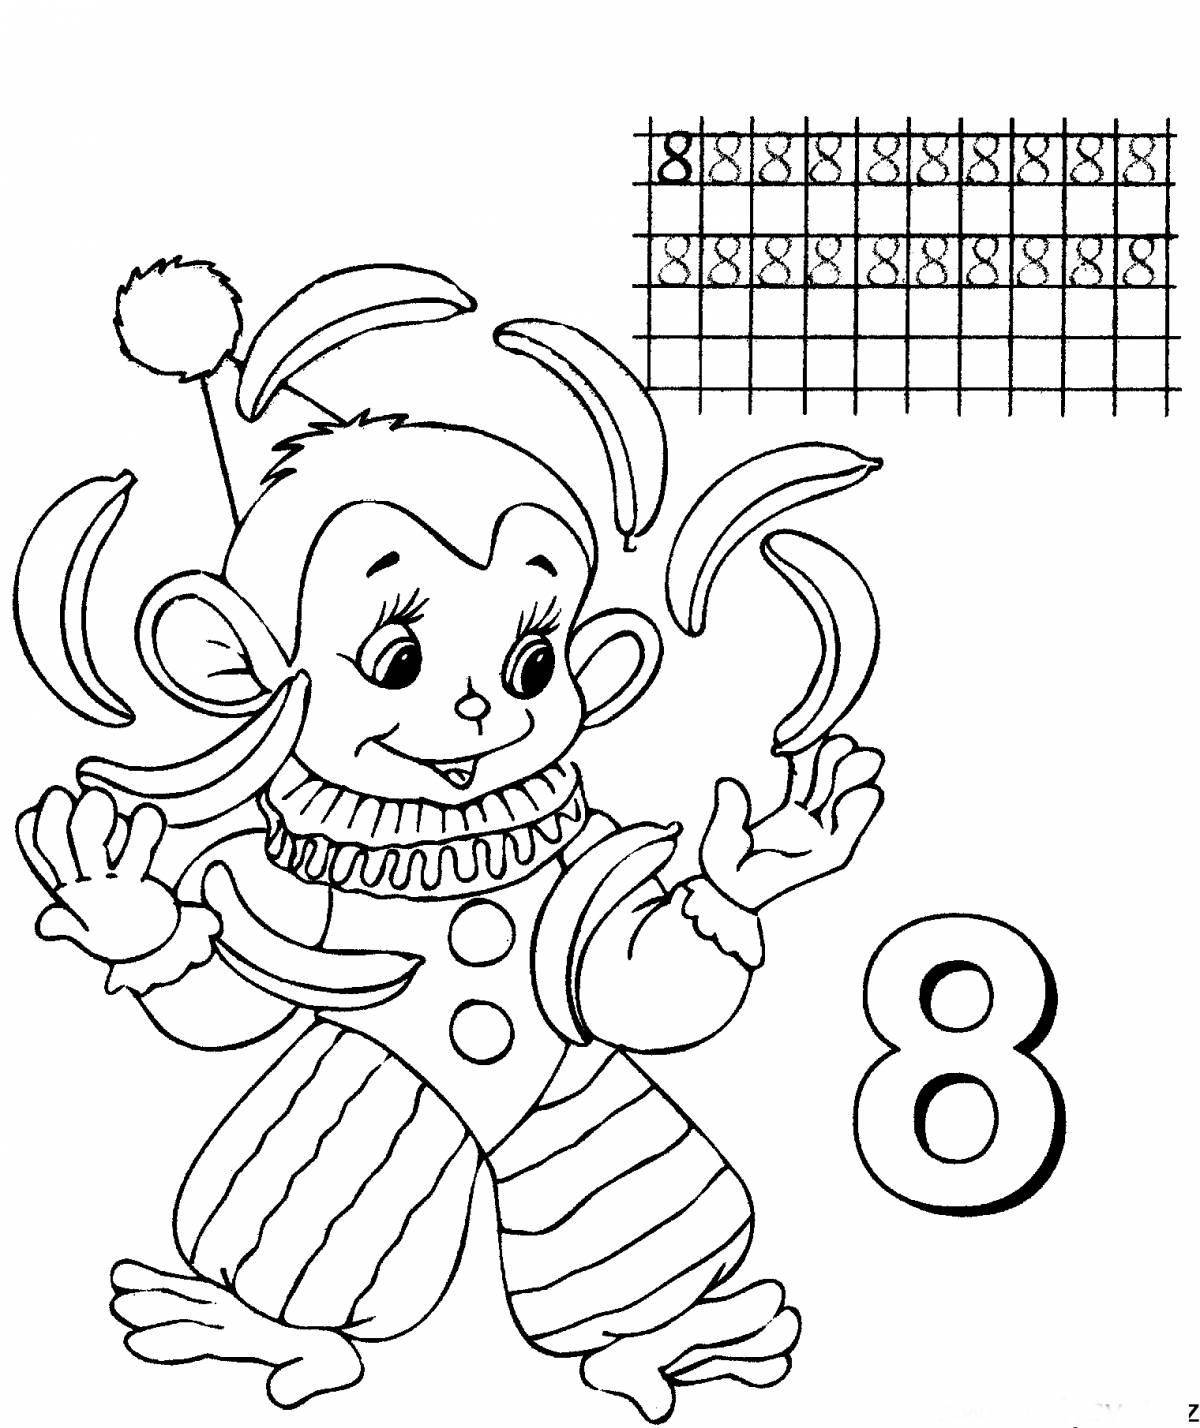 Crazy number 8 coloring pages for preschoolers